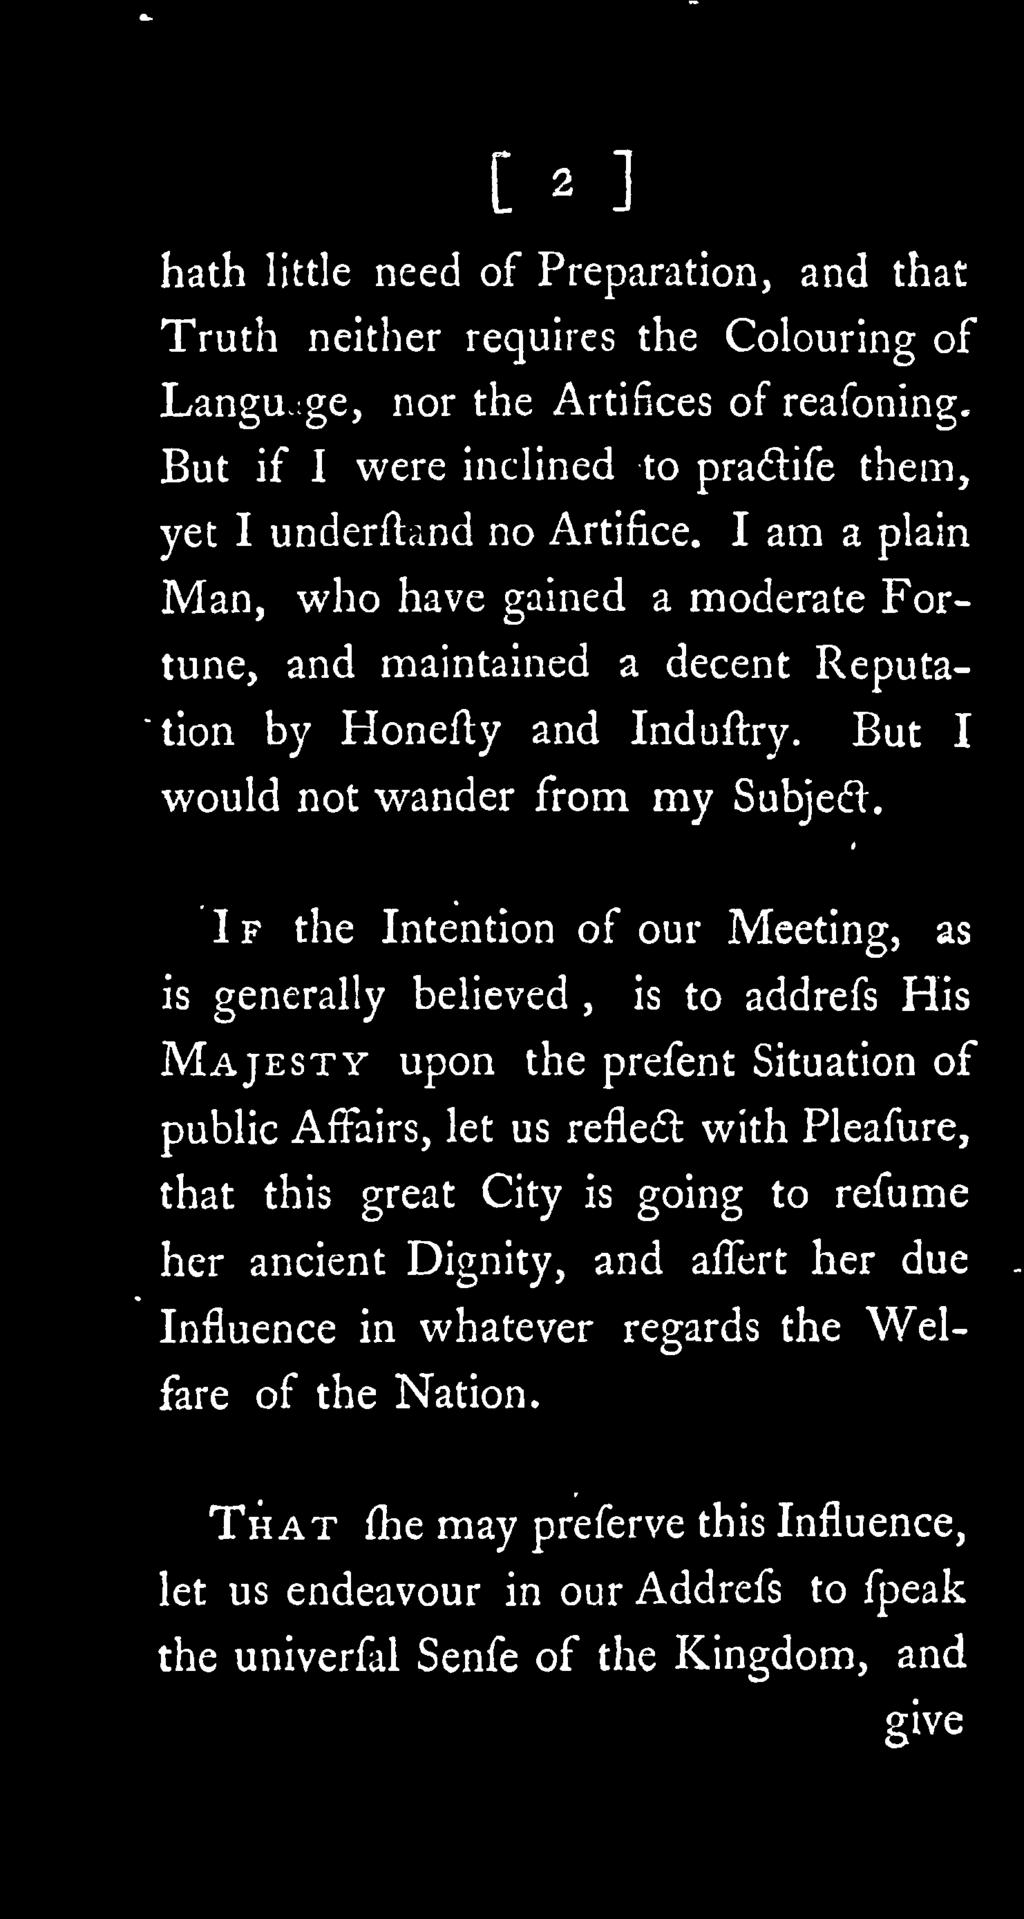 I F the Intention of our Meeting, as is generally believed, is to addrefs His Majesty upon the prefent Situation of public